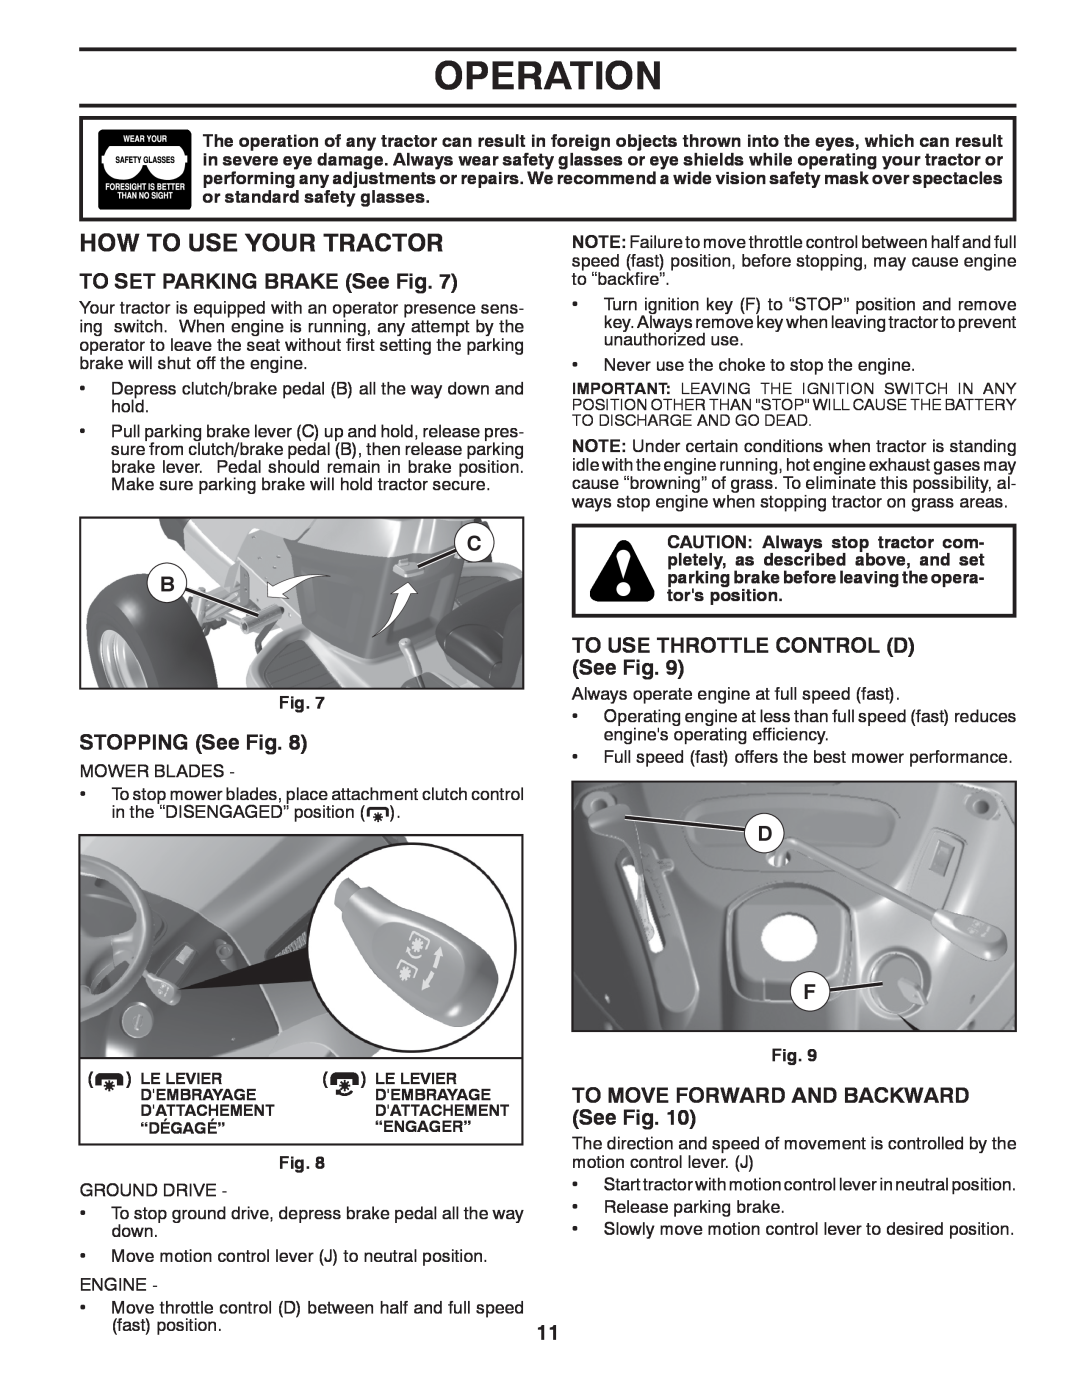 Husqvarna LTH1438 owner manual How To Use Your Tractor, Operation, TO SET PARKING BRAKE See Fig, STOPPING See Fig 